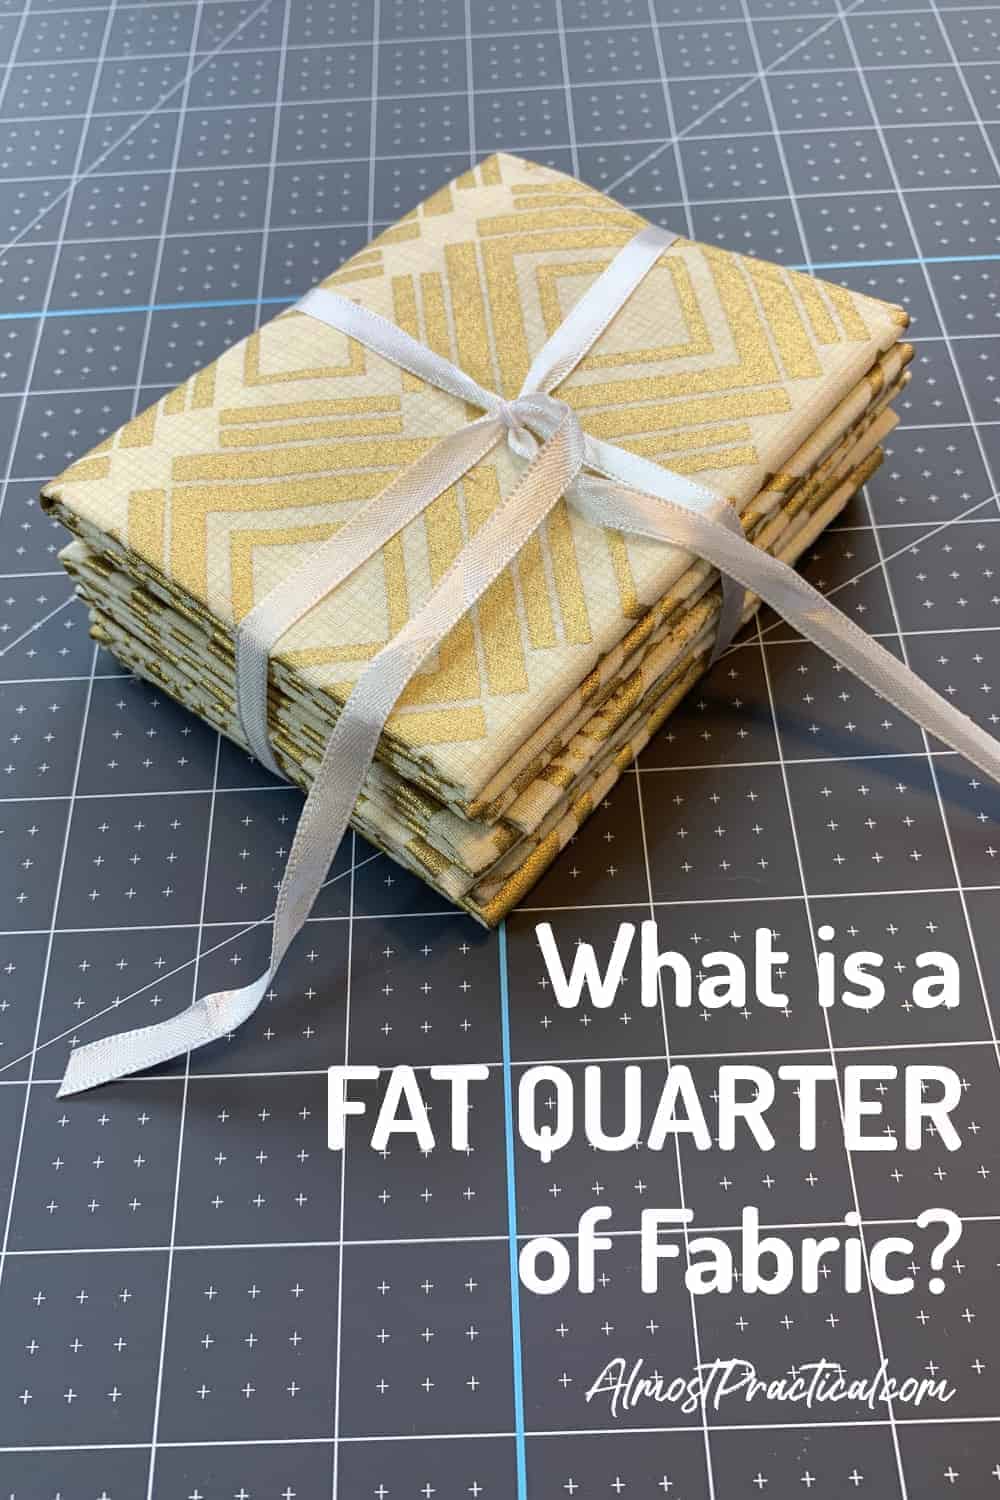 fat quarter stack of fabric in cream and gold tied with a white ribbon